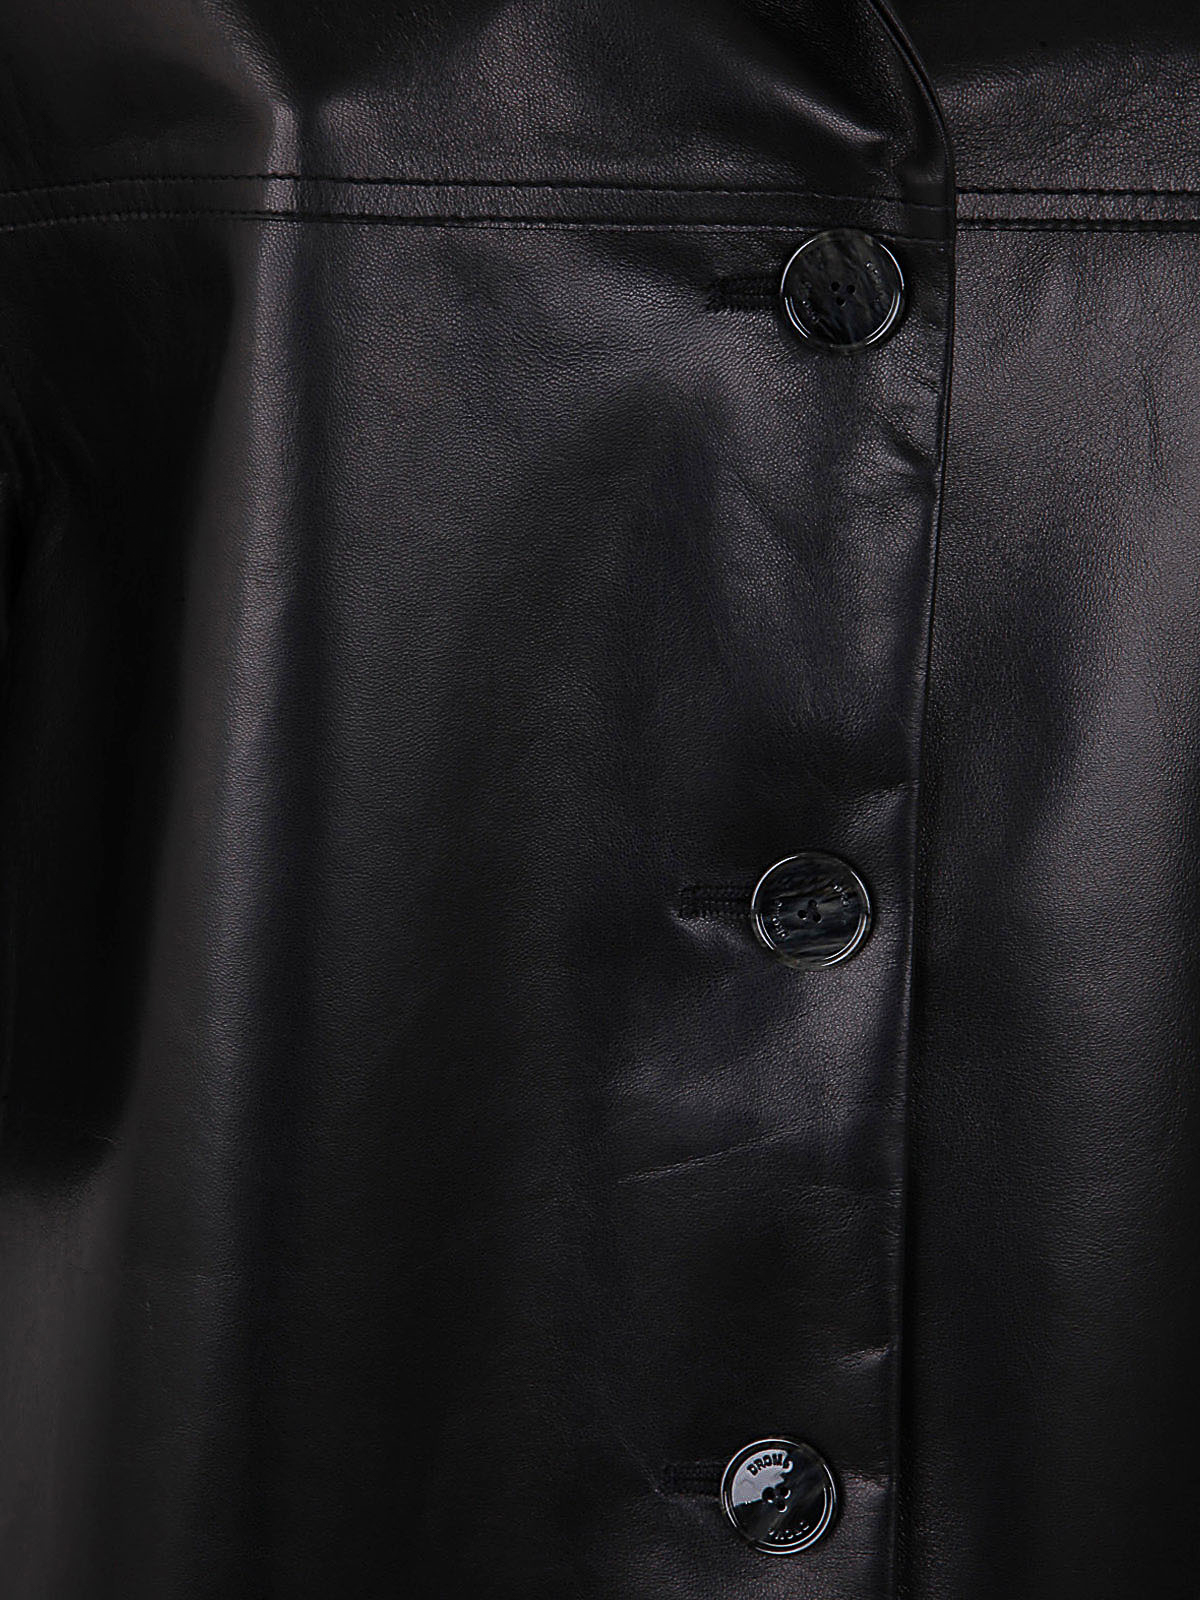 Shop Drm Leather Coat In Black